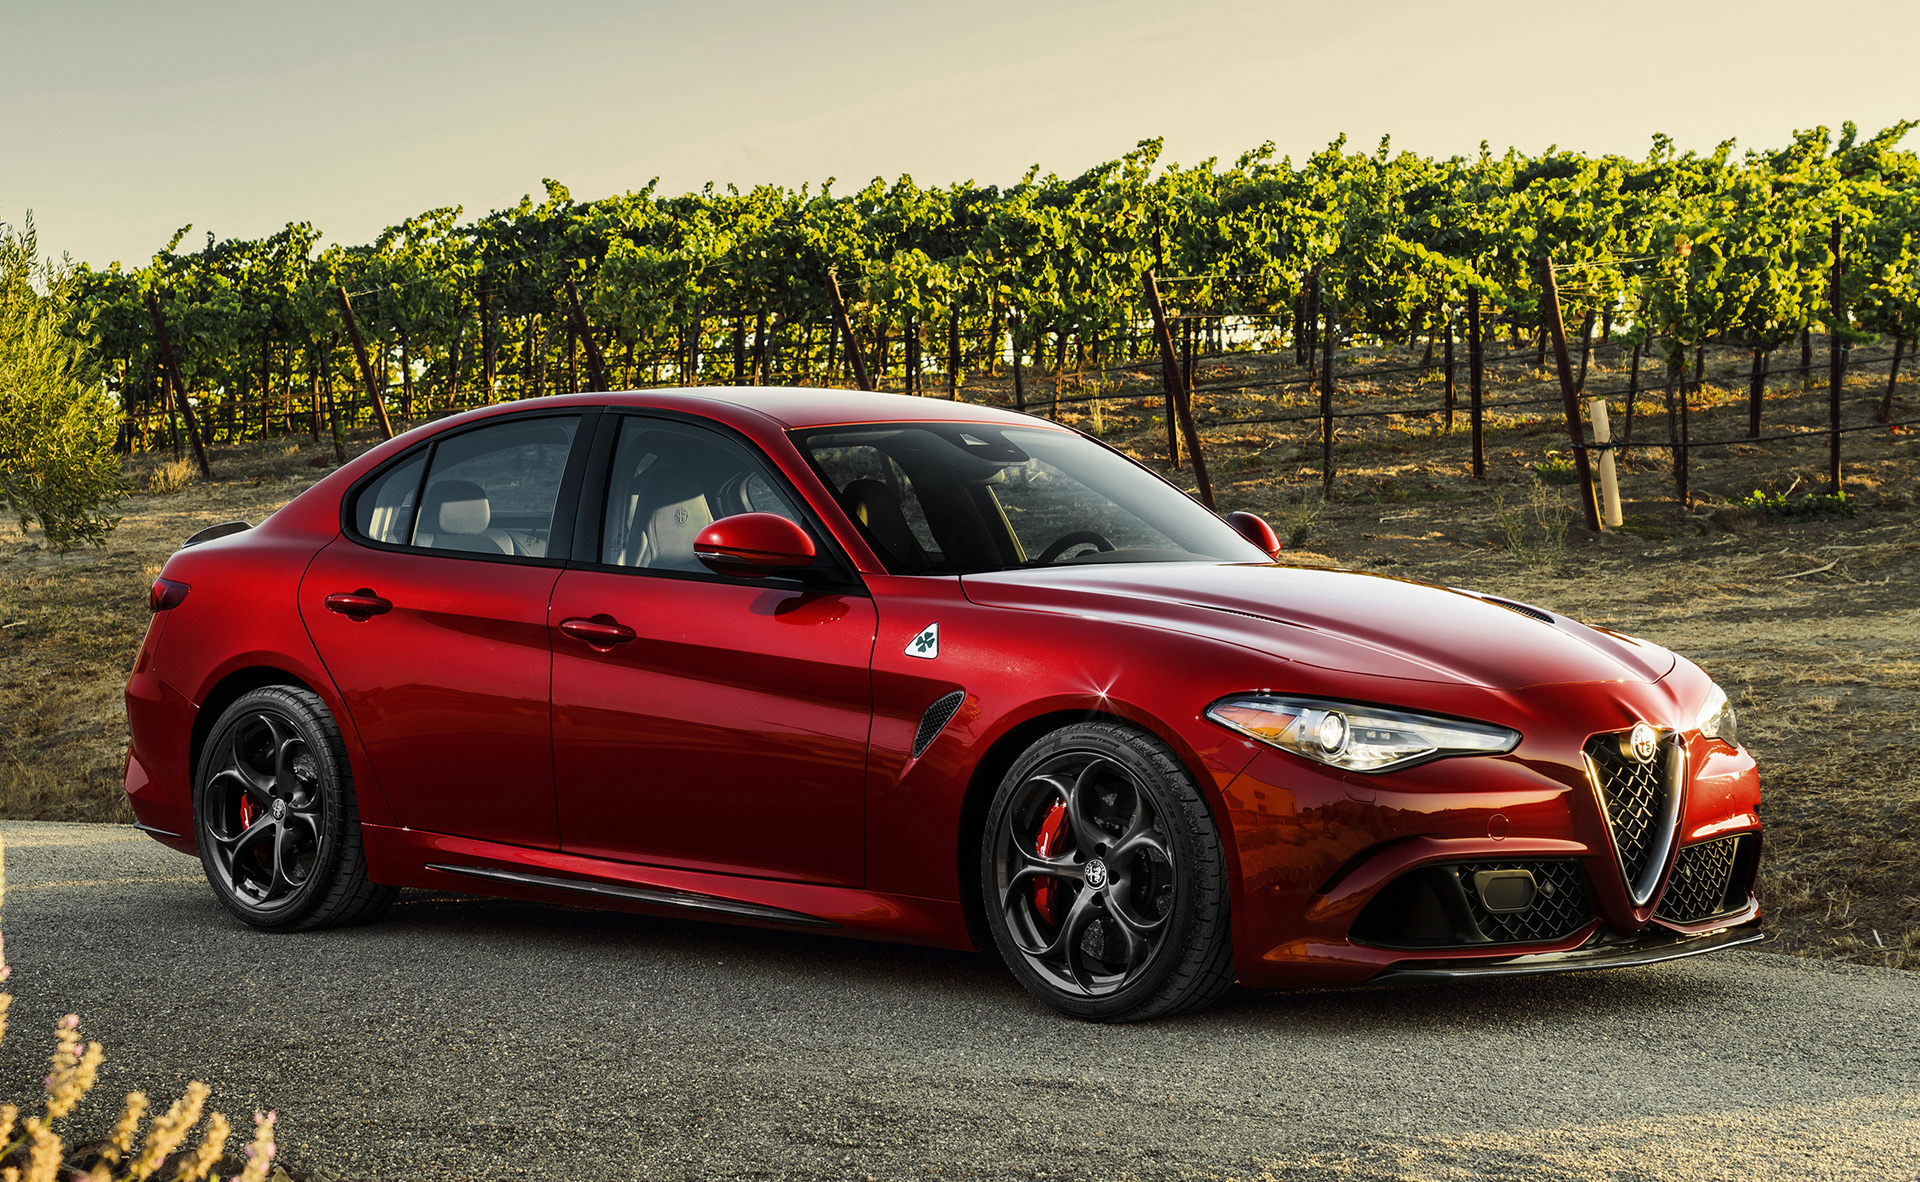 2017 Alfa Romeo Giulia Review, Ratings, Specs, Prices, and Photos The